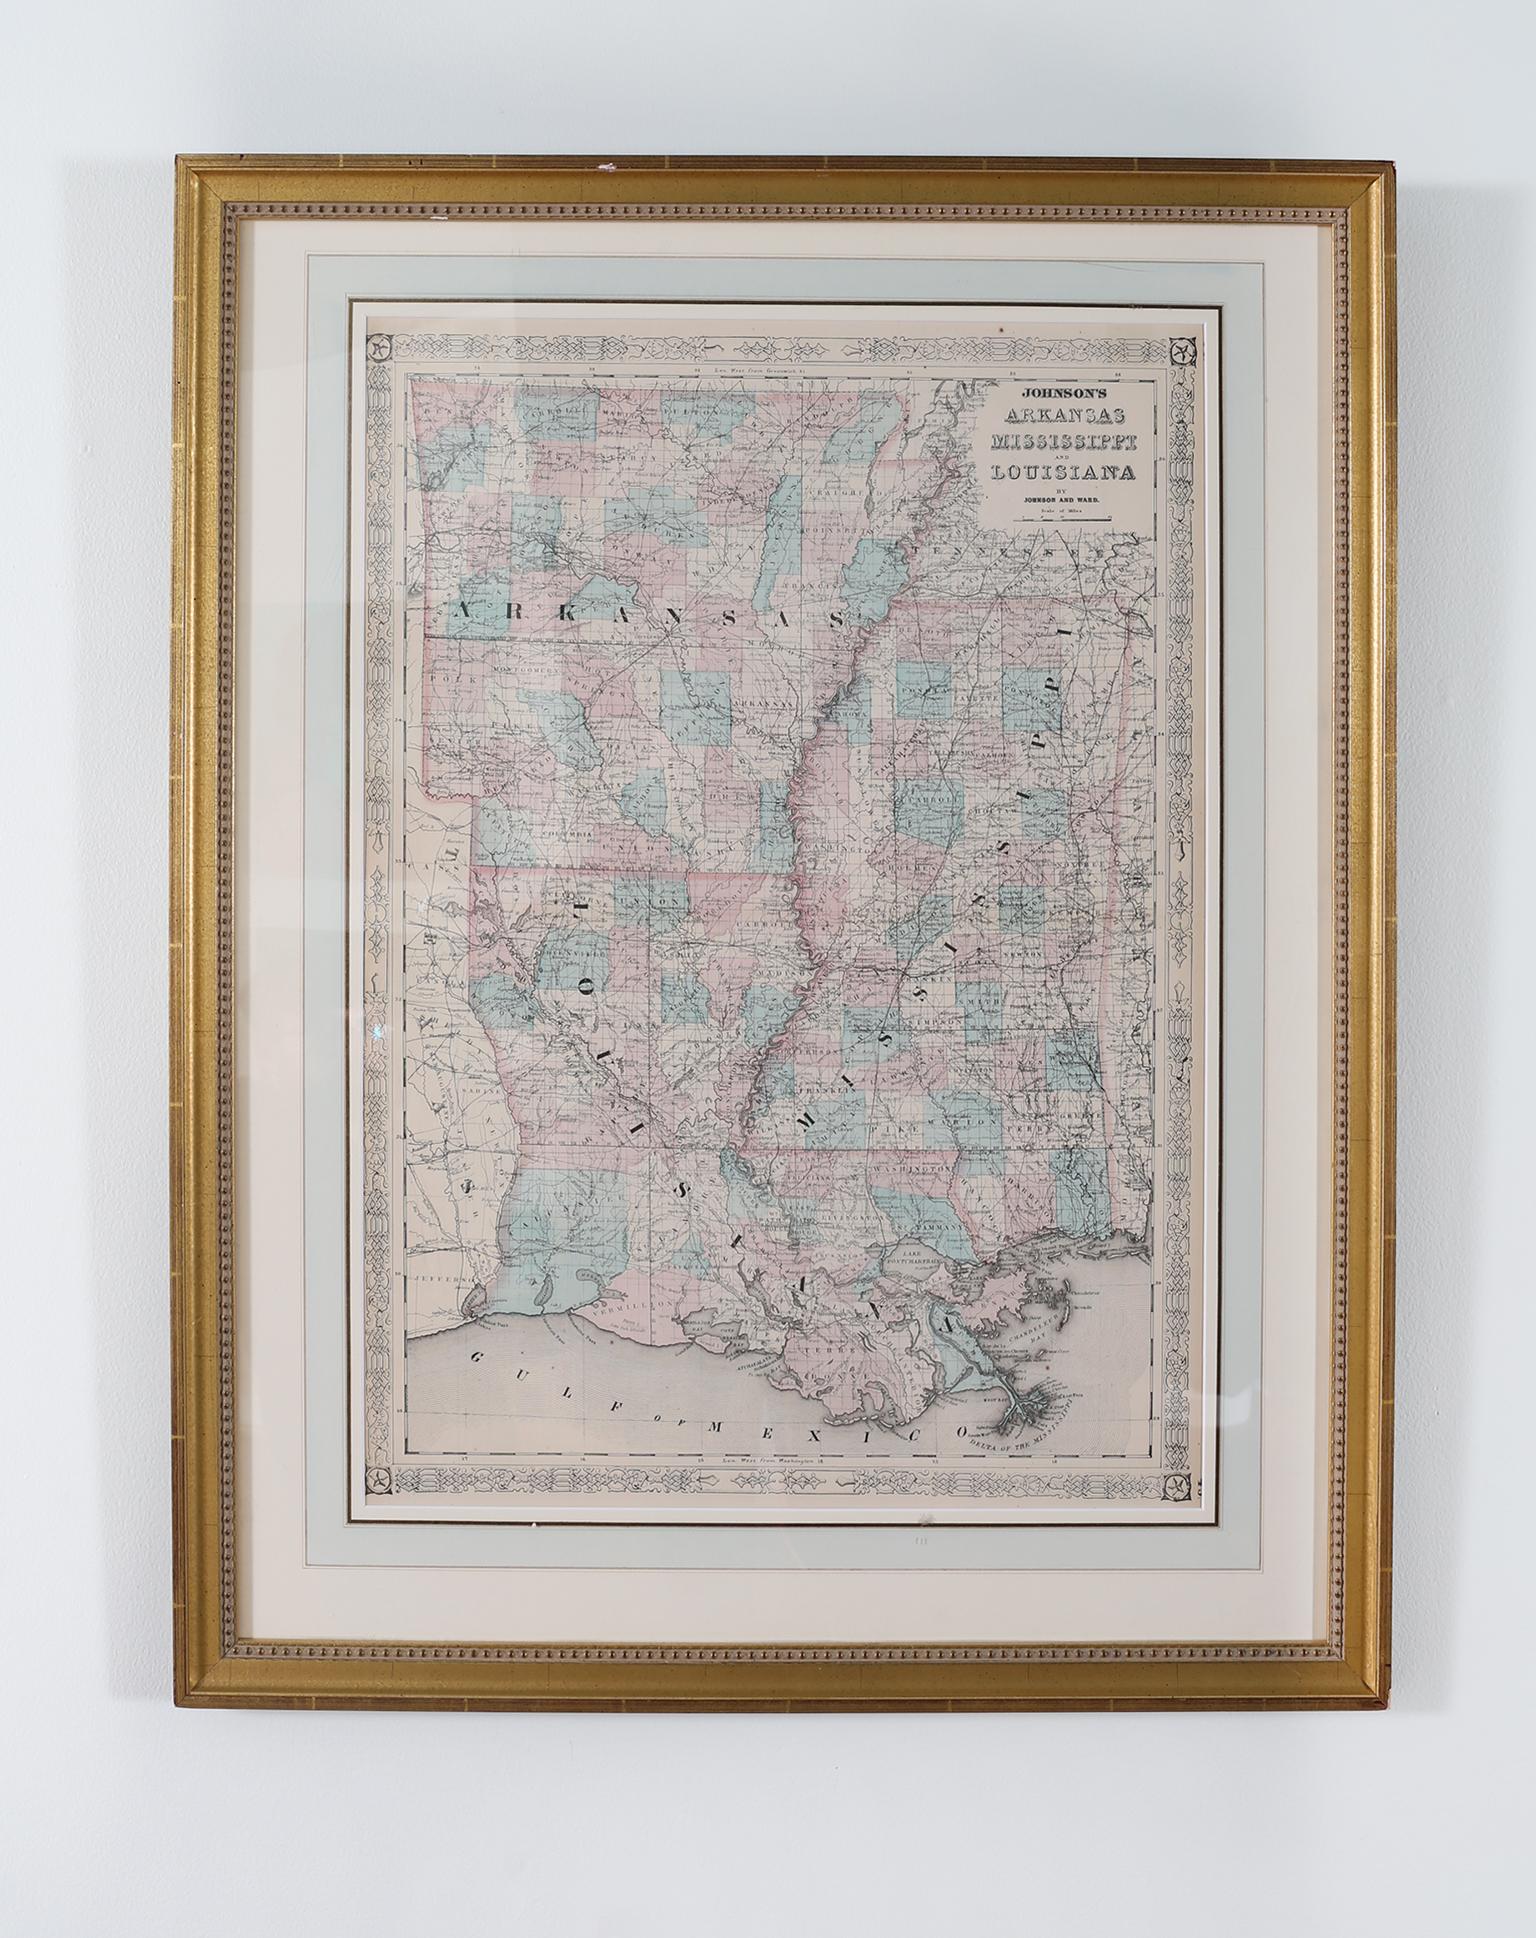 Giltwood framed and matted library / study room map of Arkansas, Mississippi, Louisiana. Each map is in great condition. Frame is about 32